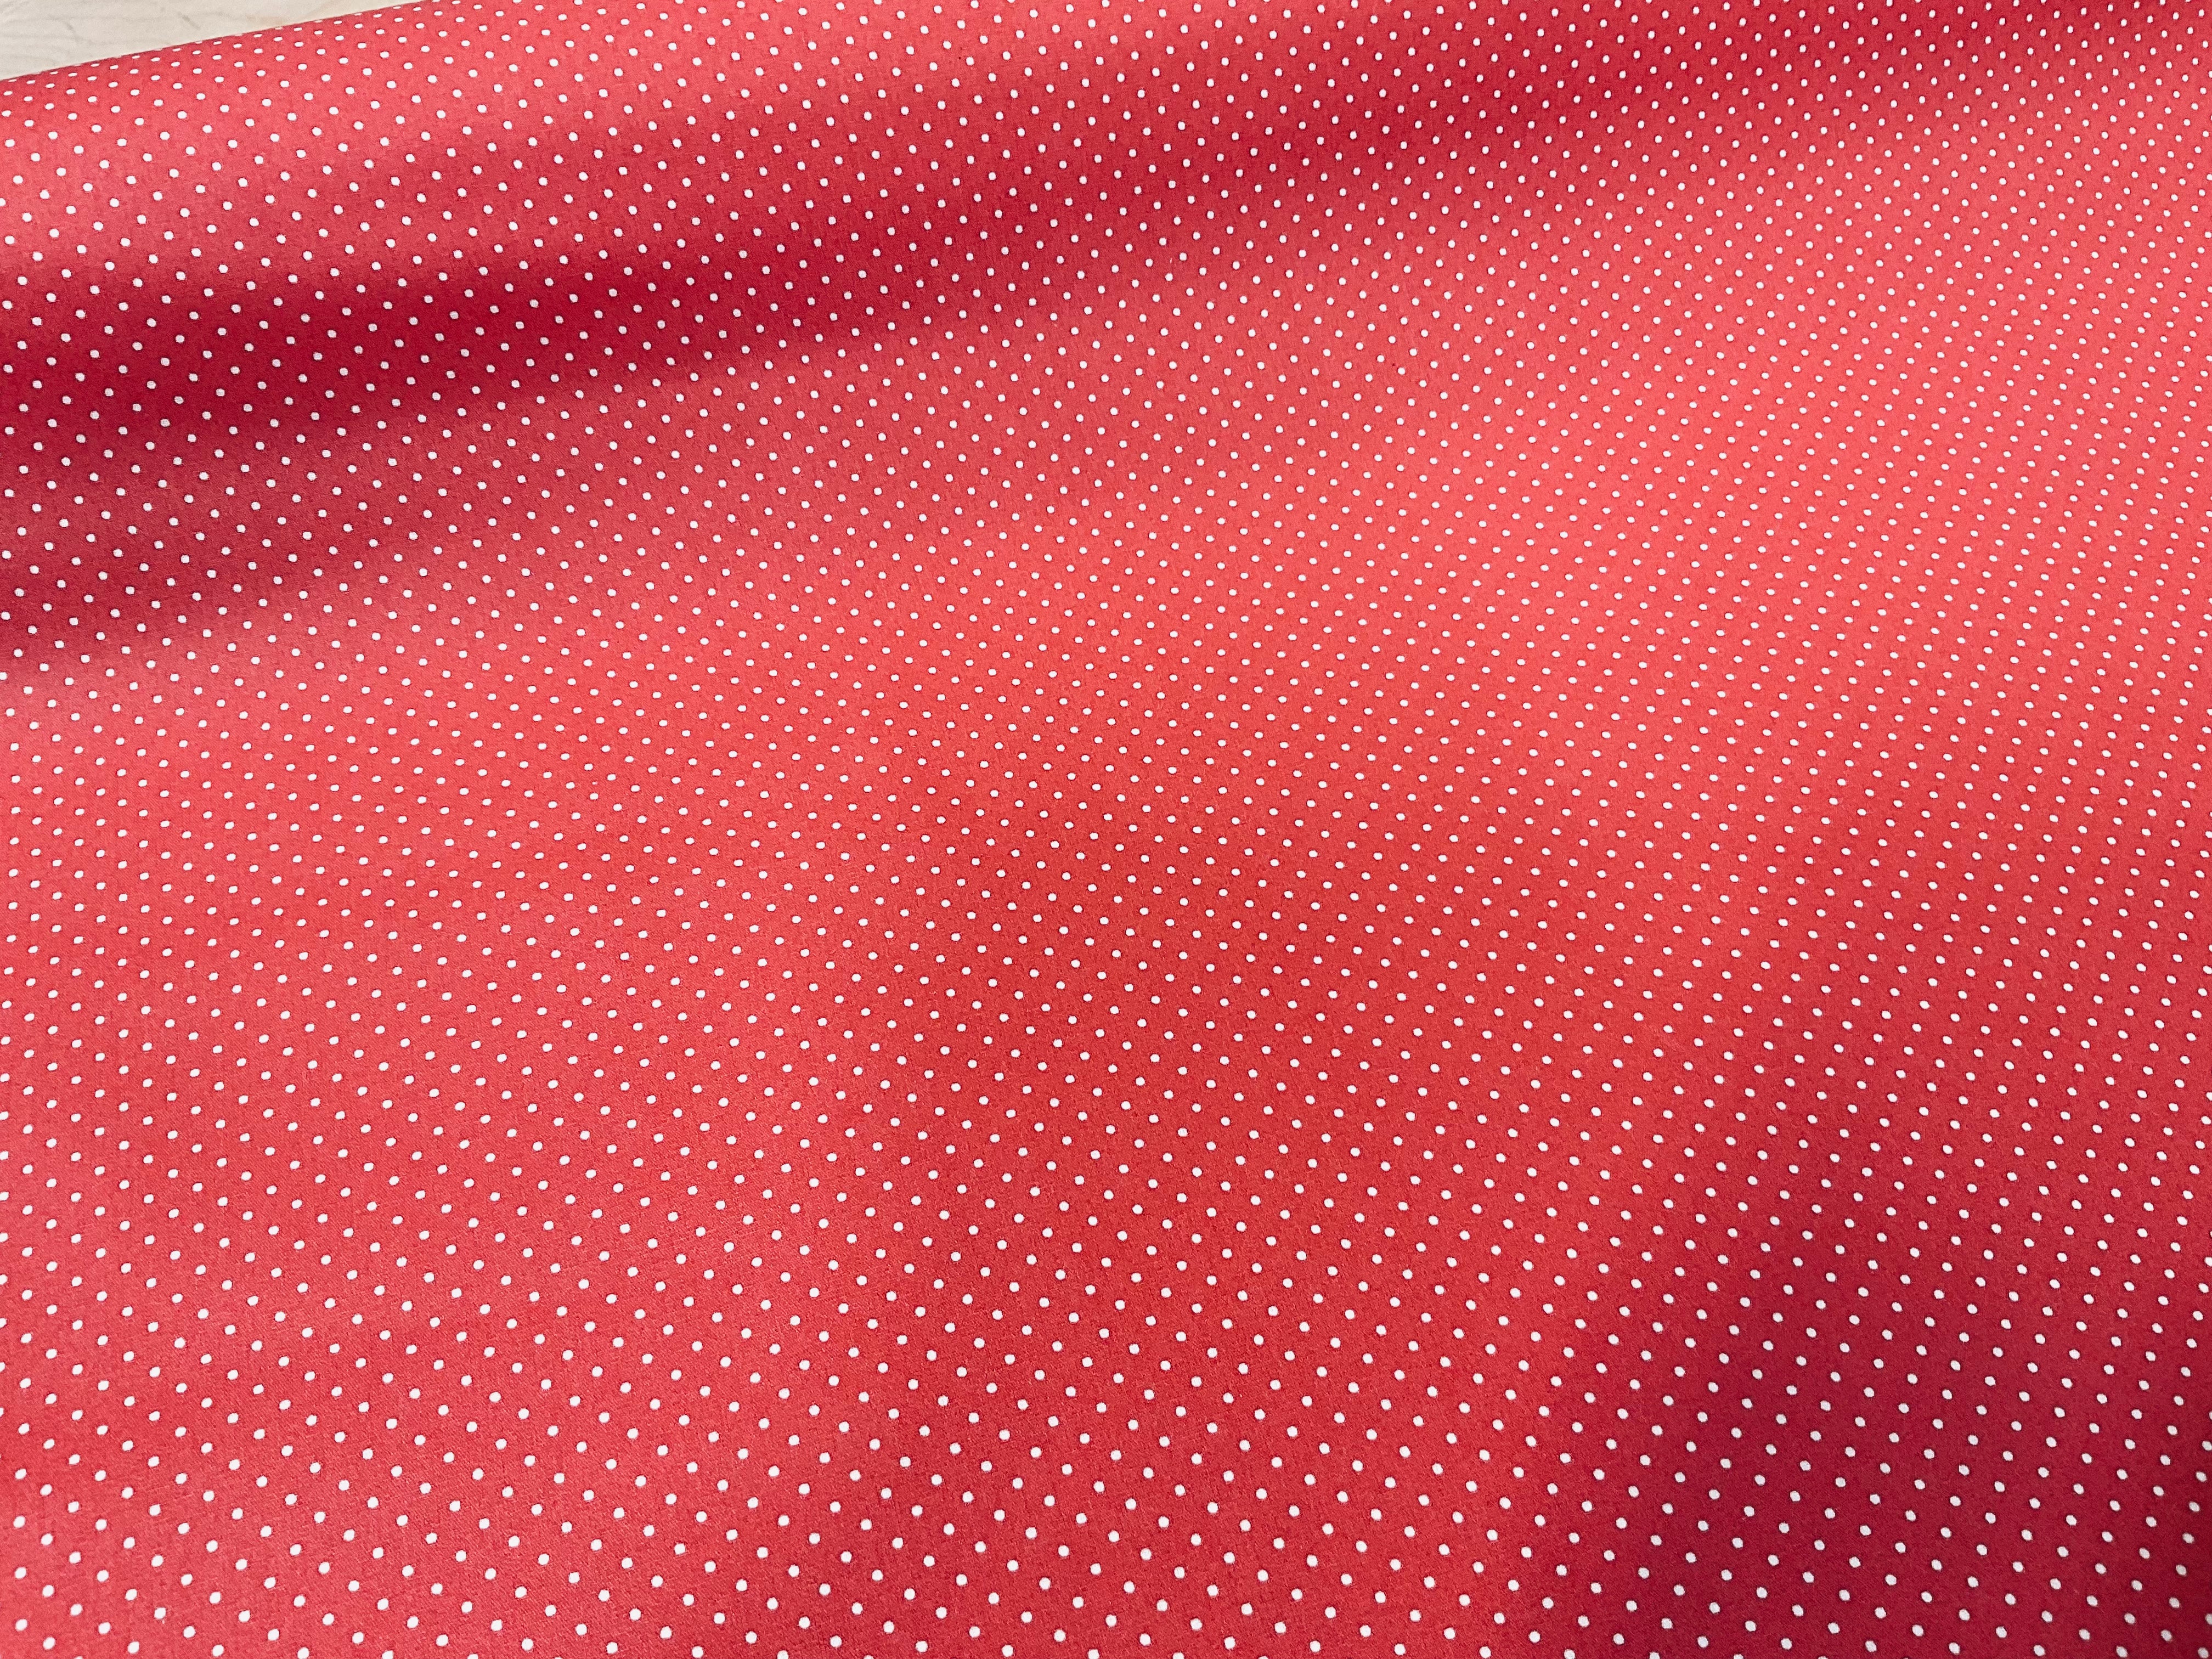 Coral Dots Coated Cotton Waterproof Fabric